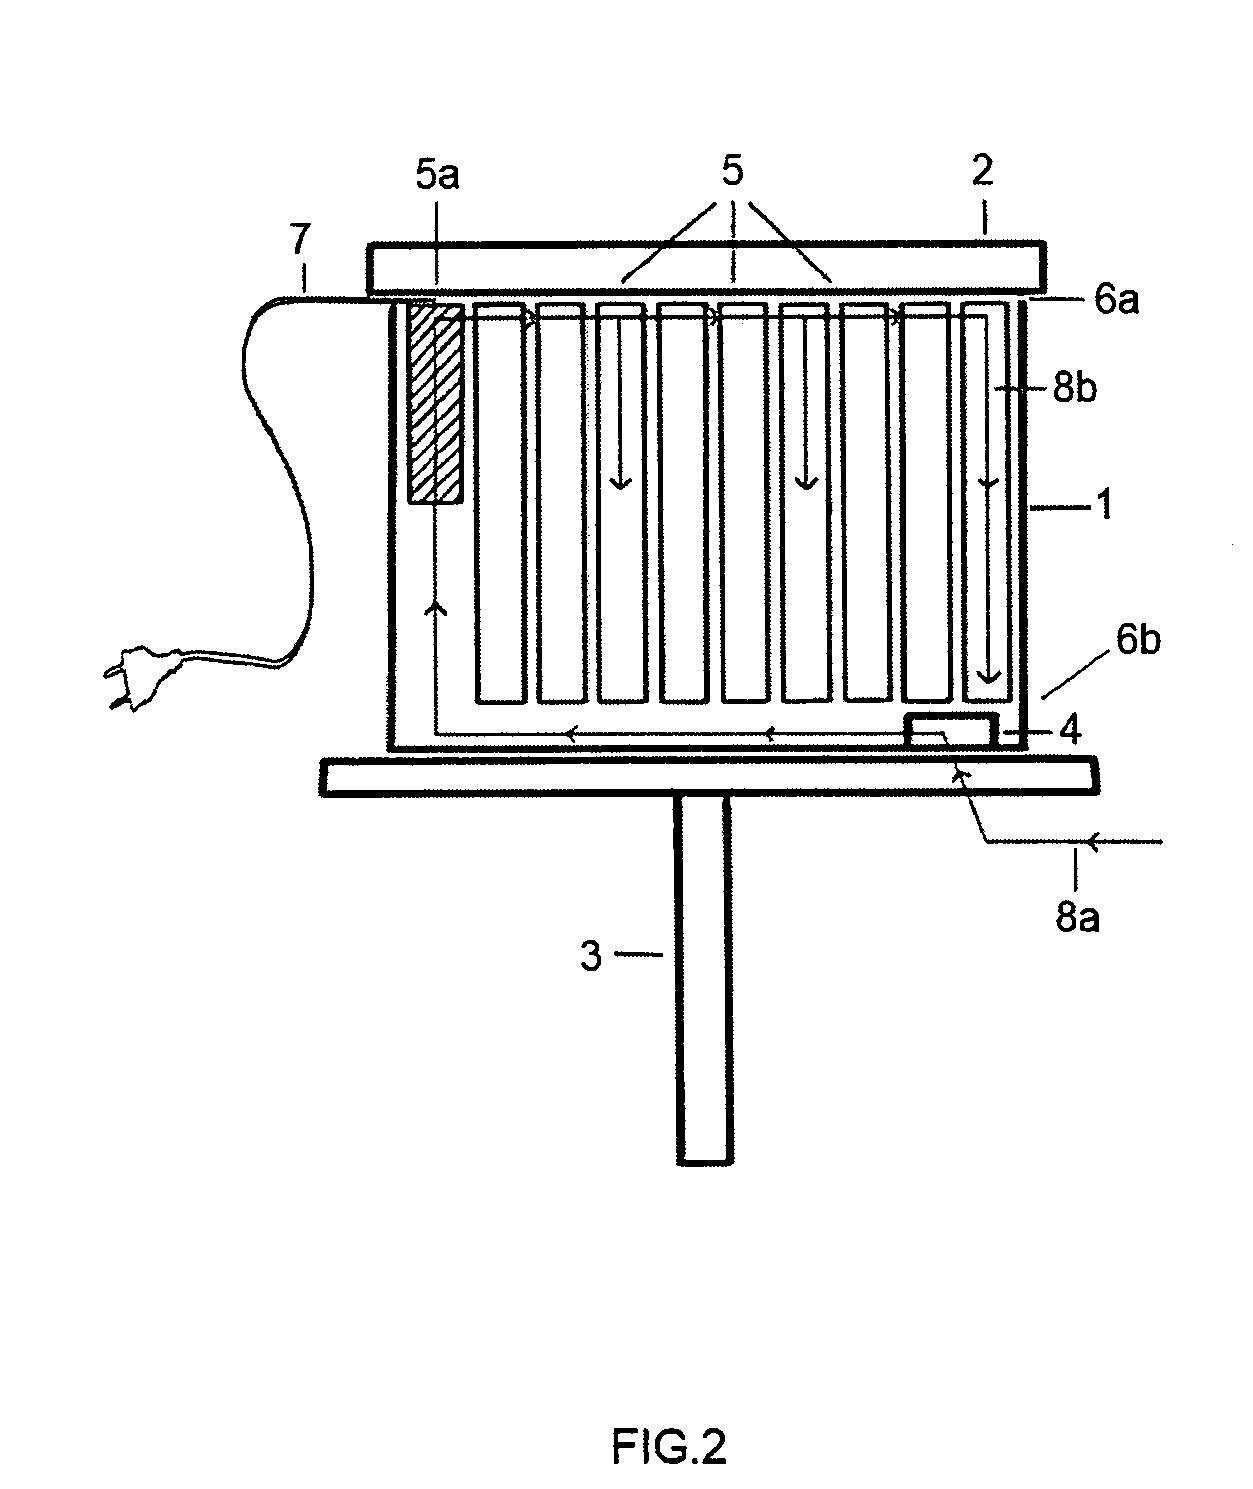 Device for hygienizing, warming, and dehumidifying a beehive